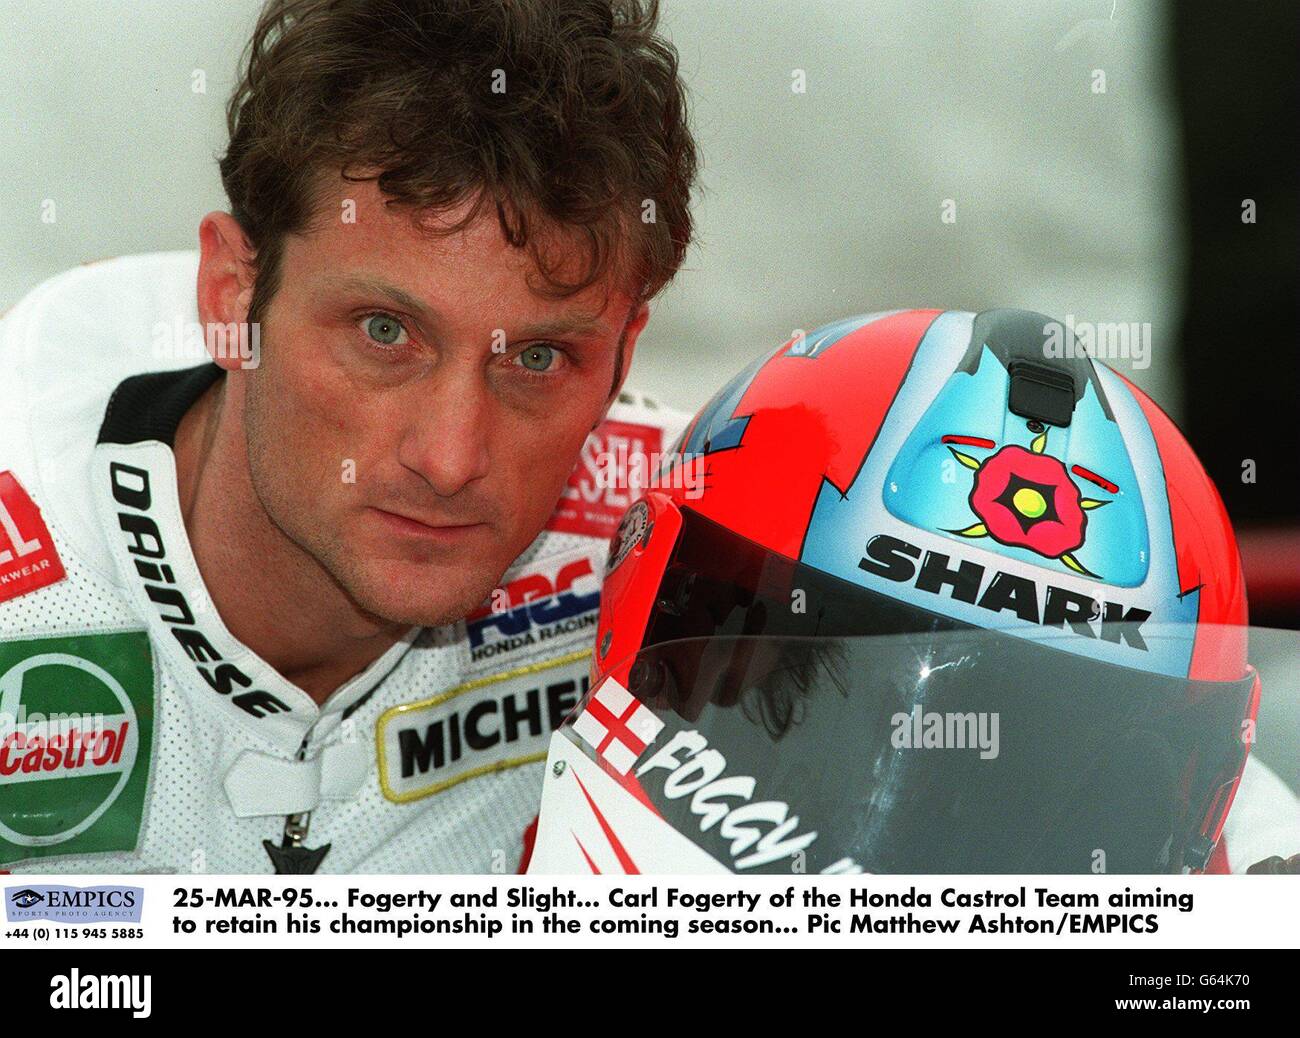 25-MAR-95. Fogarty and Slight. Carl Fogarty of the Honda Castrol Team aiming to retain his championship in the coming season Stock Photo